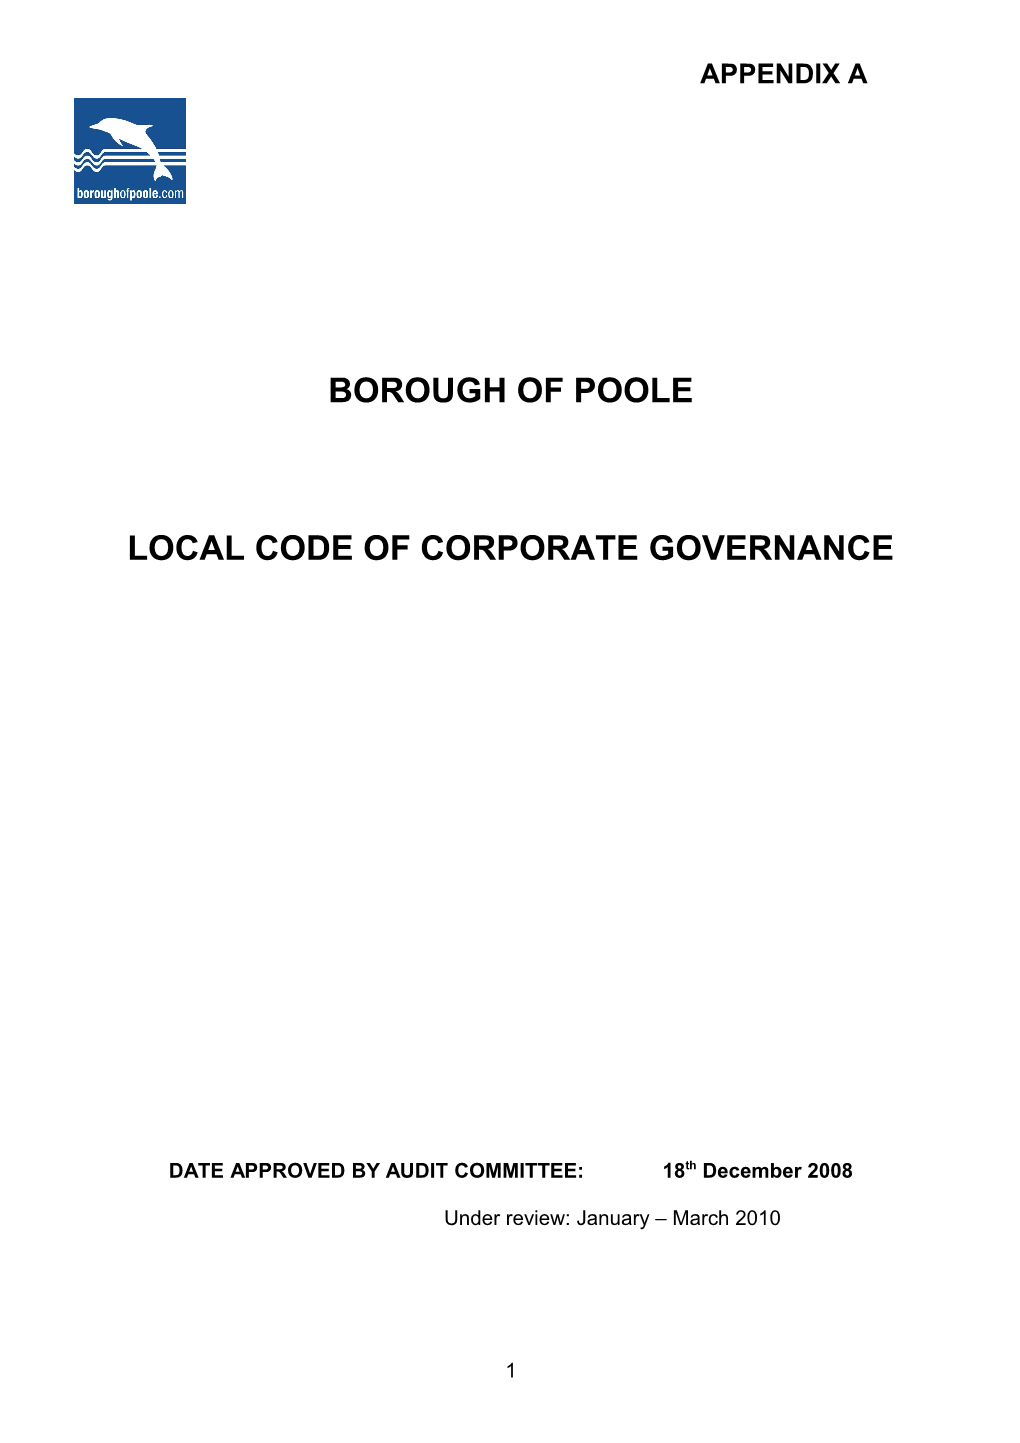 Local Code of Corporate Governance Appendix A